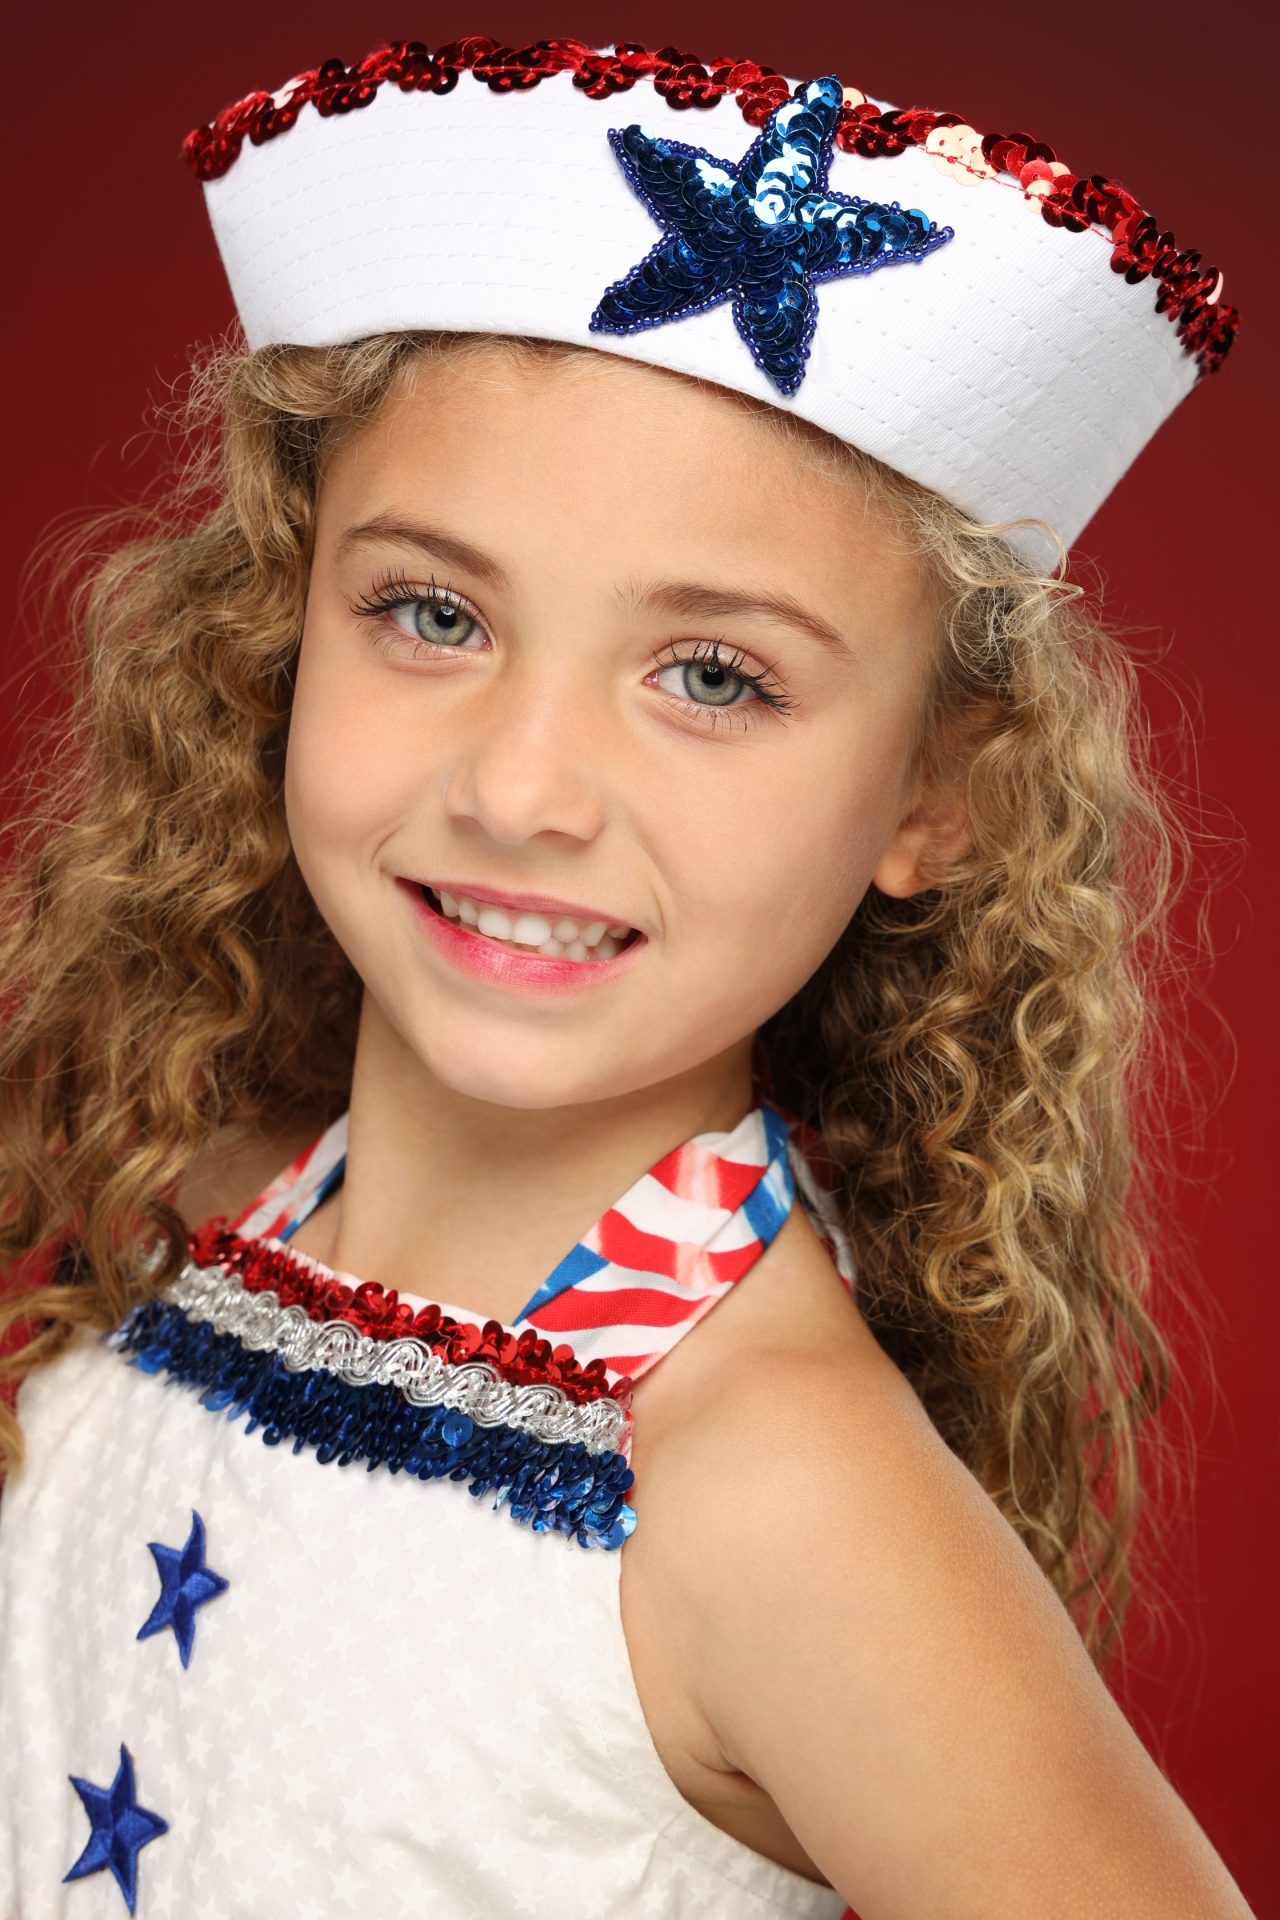 Exulting Images dancer headshot of young girl in red white and blue maritime inspired costume and hat